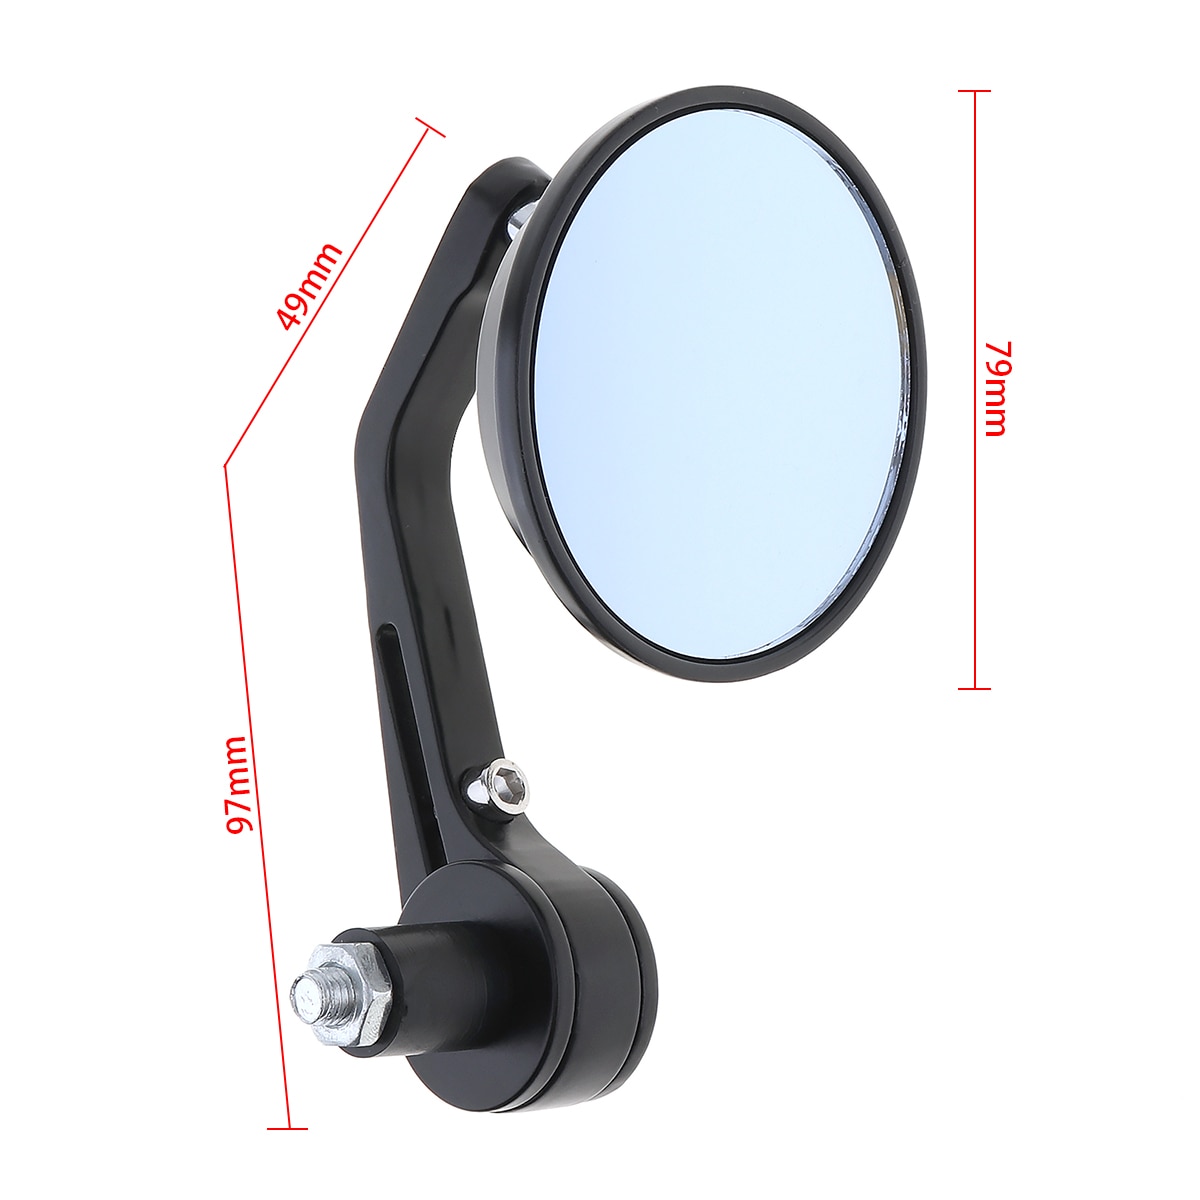 2Pcs-Universal-7-8-22mm-Bar-End-Rear-Mirrors-Motorcycle-Accessories-Motorbike-Scooters-Rearview-Mirror-Side-11